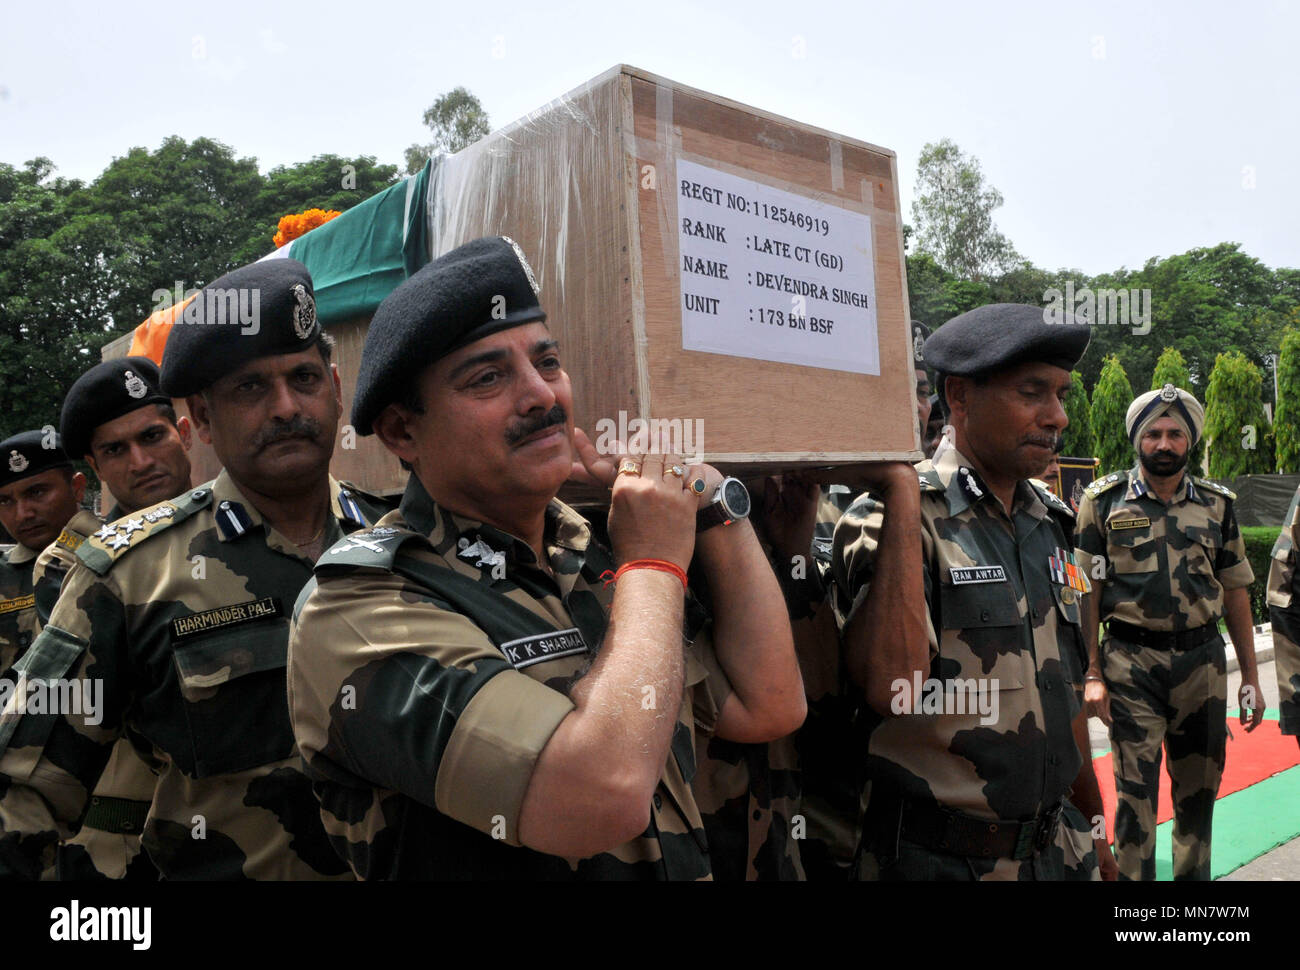 Jammu. 15th May, 2018. Border guards of India's Border Security Force (BSF) carry the coffin of their colleague during his wreath laying ceremony at their headquarter in Jammu, the winter capital of Indian-controlled Kashmir, May 15, 2018. An Indian border guard belonging to Border Security Force (BSF) was killed Tuesday during an exchange of fire with Pakistani troops on International Border (IB) in Kashmir, officials said. Credit: Xinhua/Alamy Live News Stock Photo